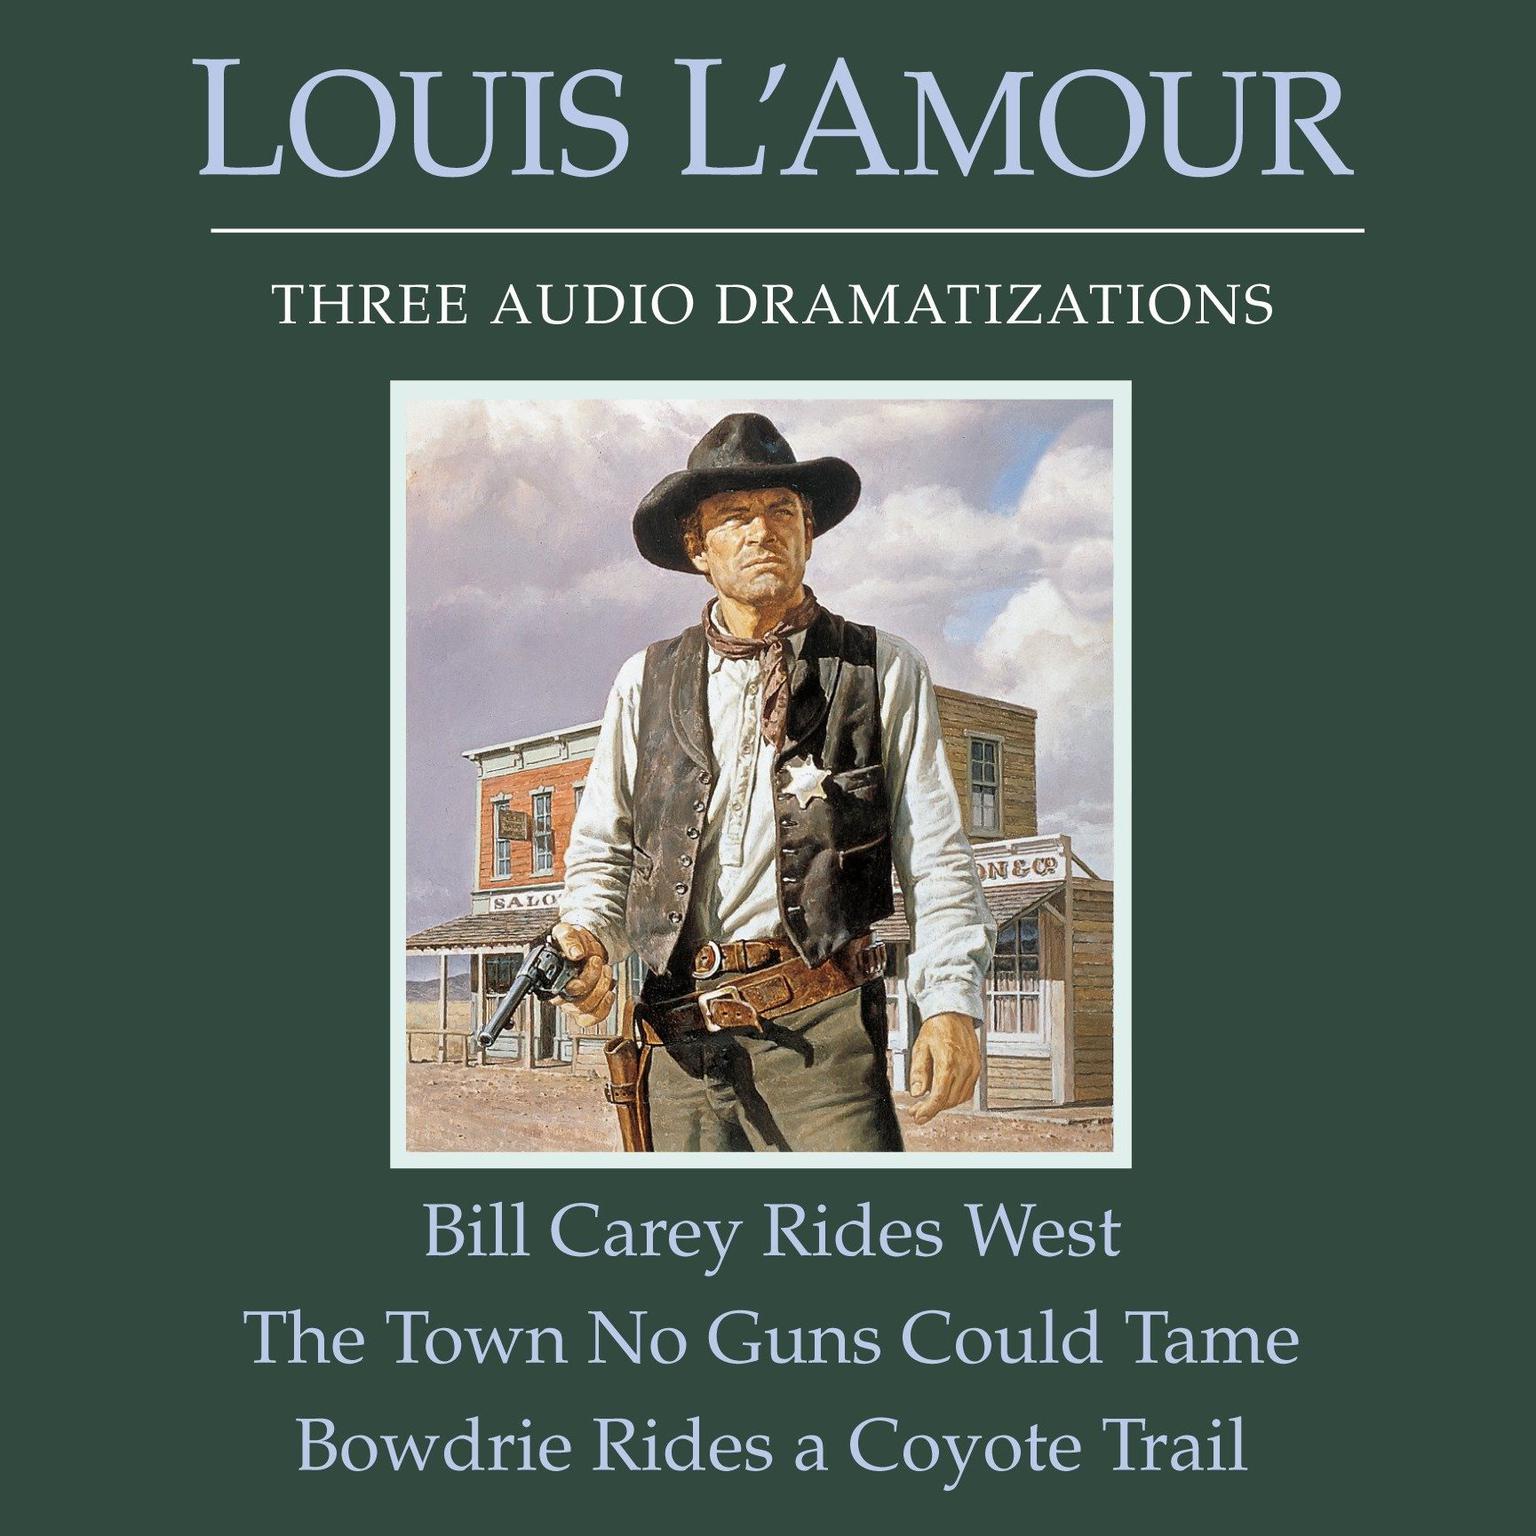 Bill Carey Rides West/The Town No Guns Could Tame/Bowdrie Rides a Coyote Trail Audiobook, by Louis L’Amour